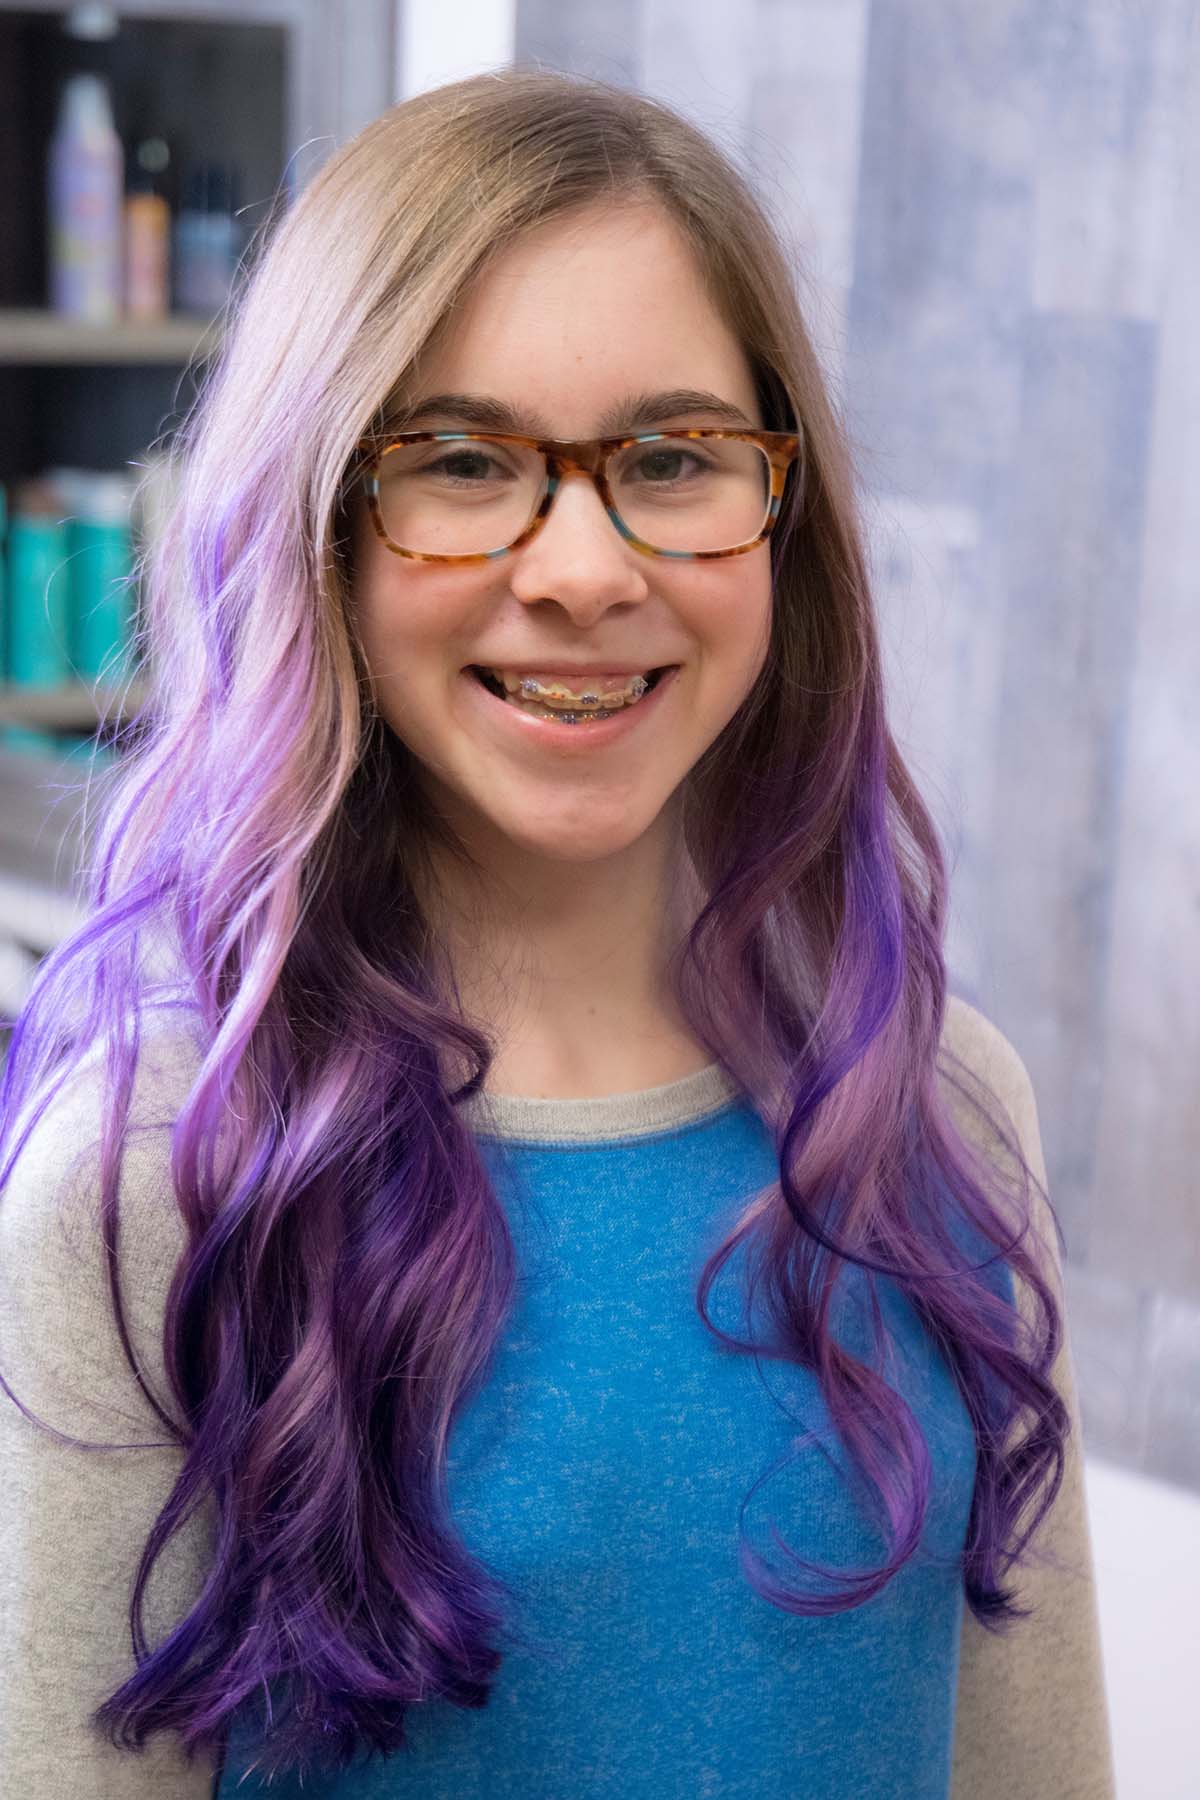 Orthodontic treatment using clear braces for teens on this young girl with purple hair